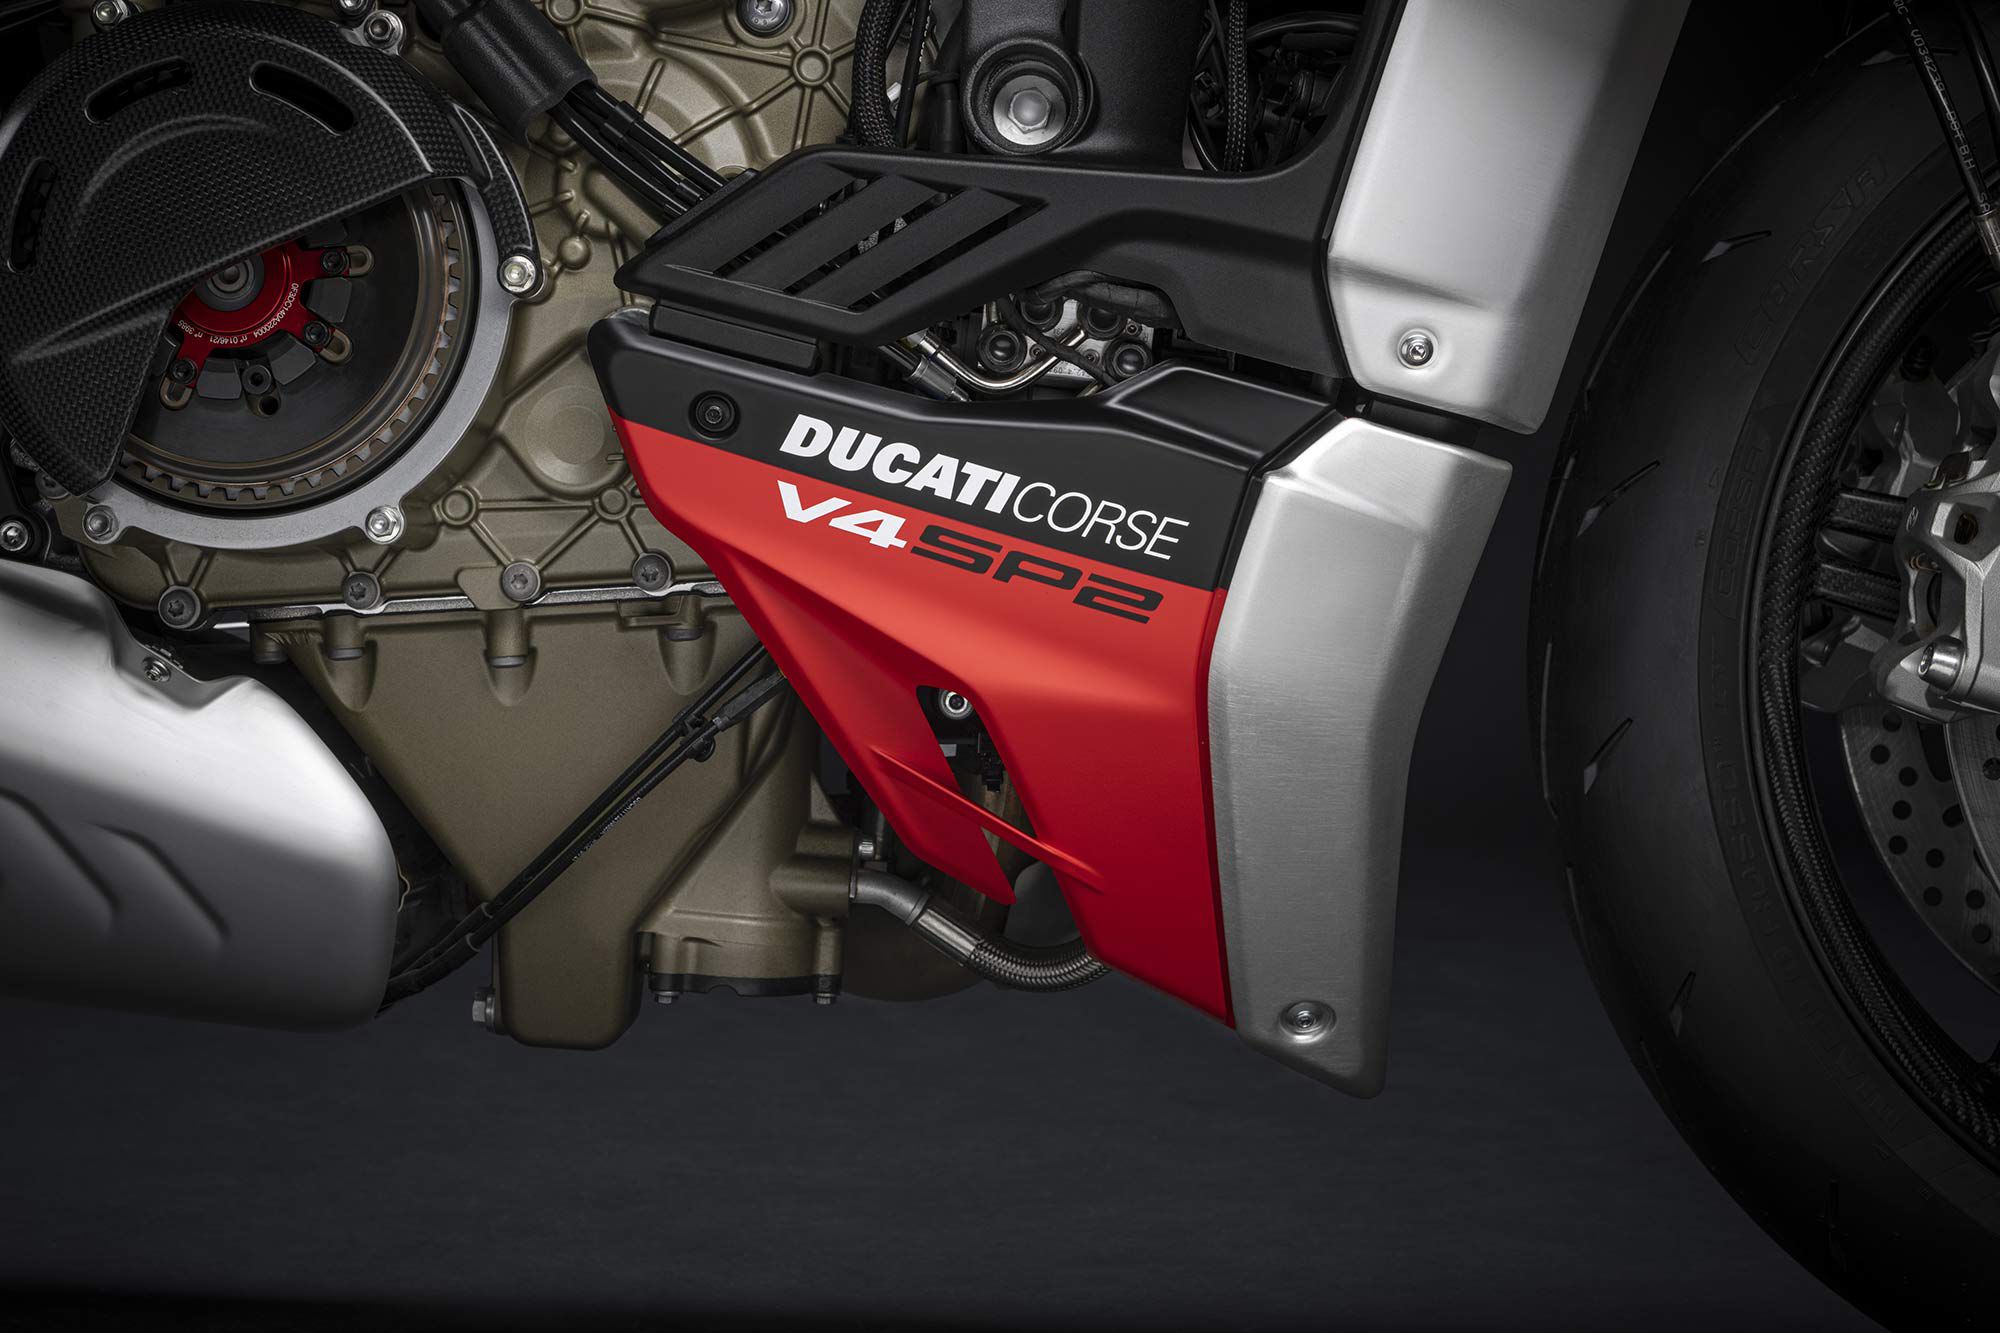 The Ducati Streetfighter V4 SP2 dry clutch and lower fairing badging.